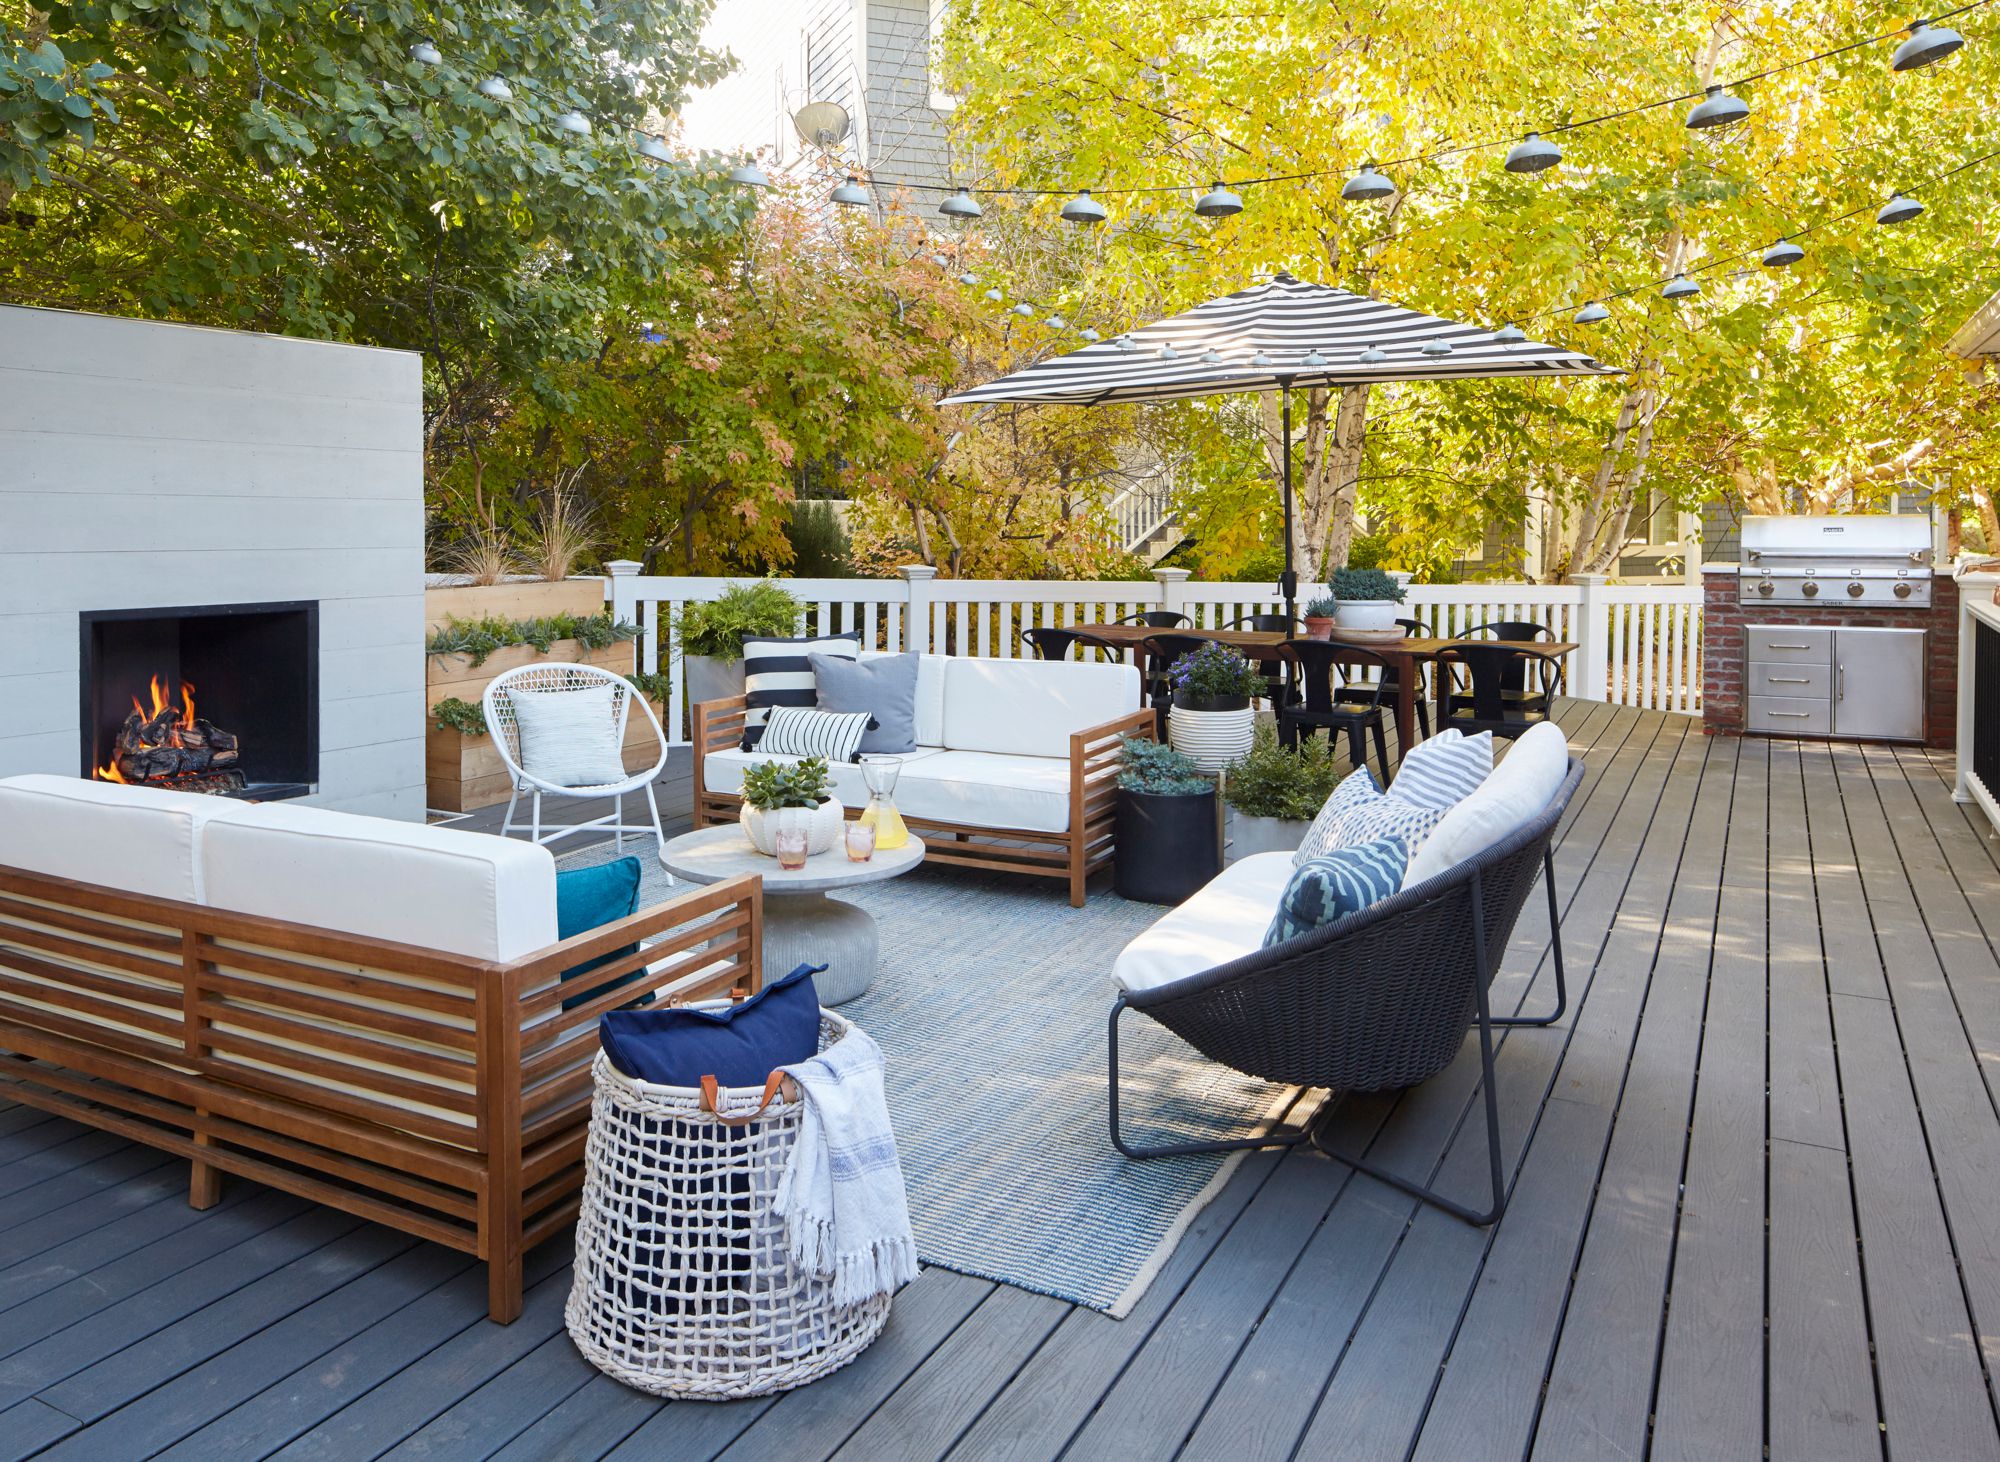 7 Dock Trends To Elevate Your Outdoor Space - Vermillion All Star Wash